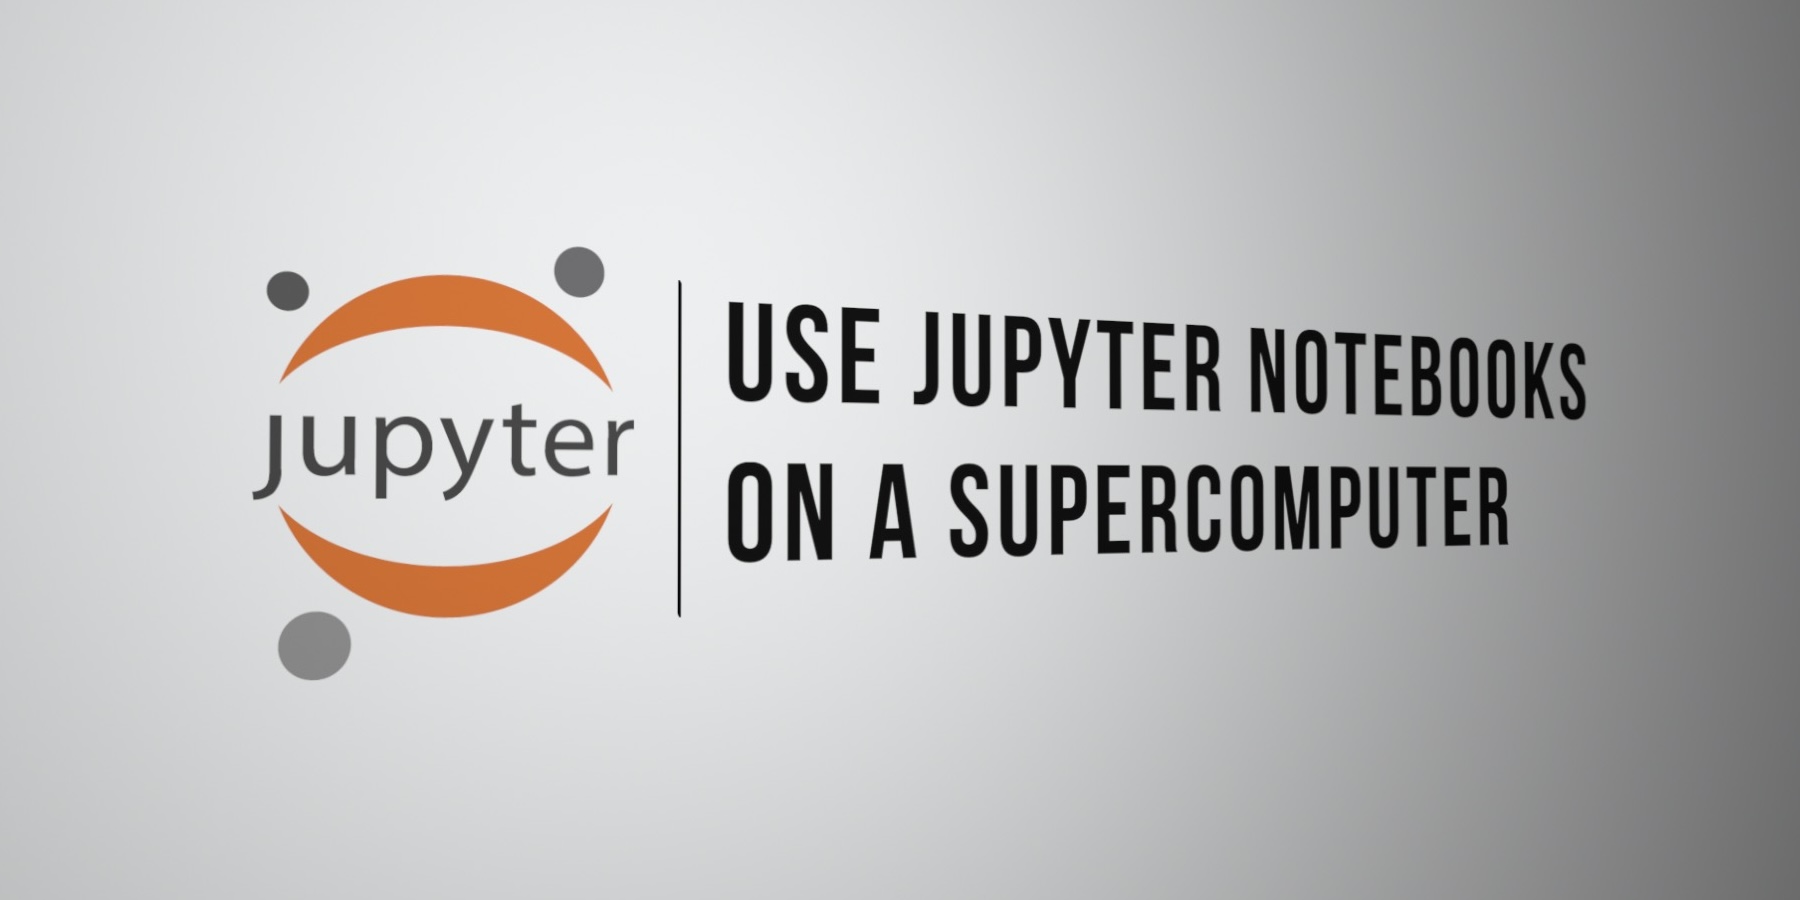 Jupyter logo with the title "Use Jupyter notebooks on a supercomputer"